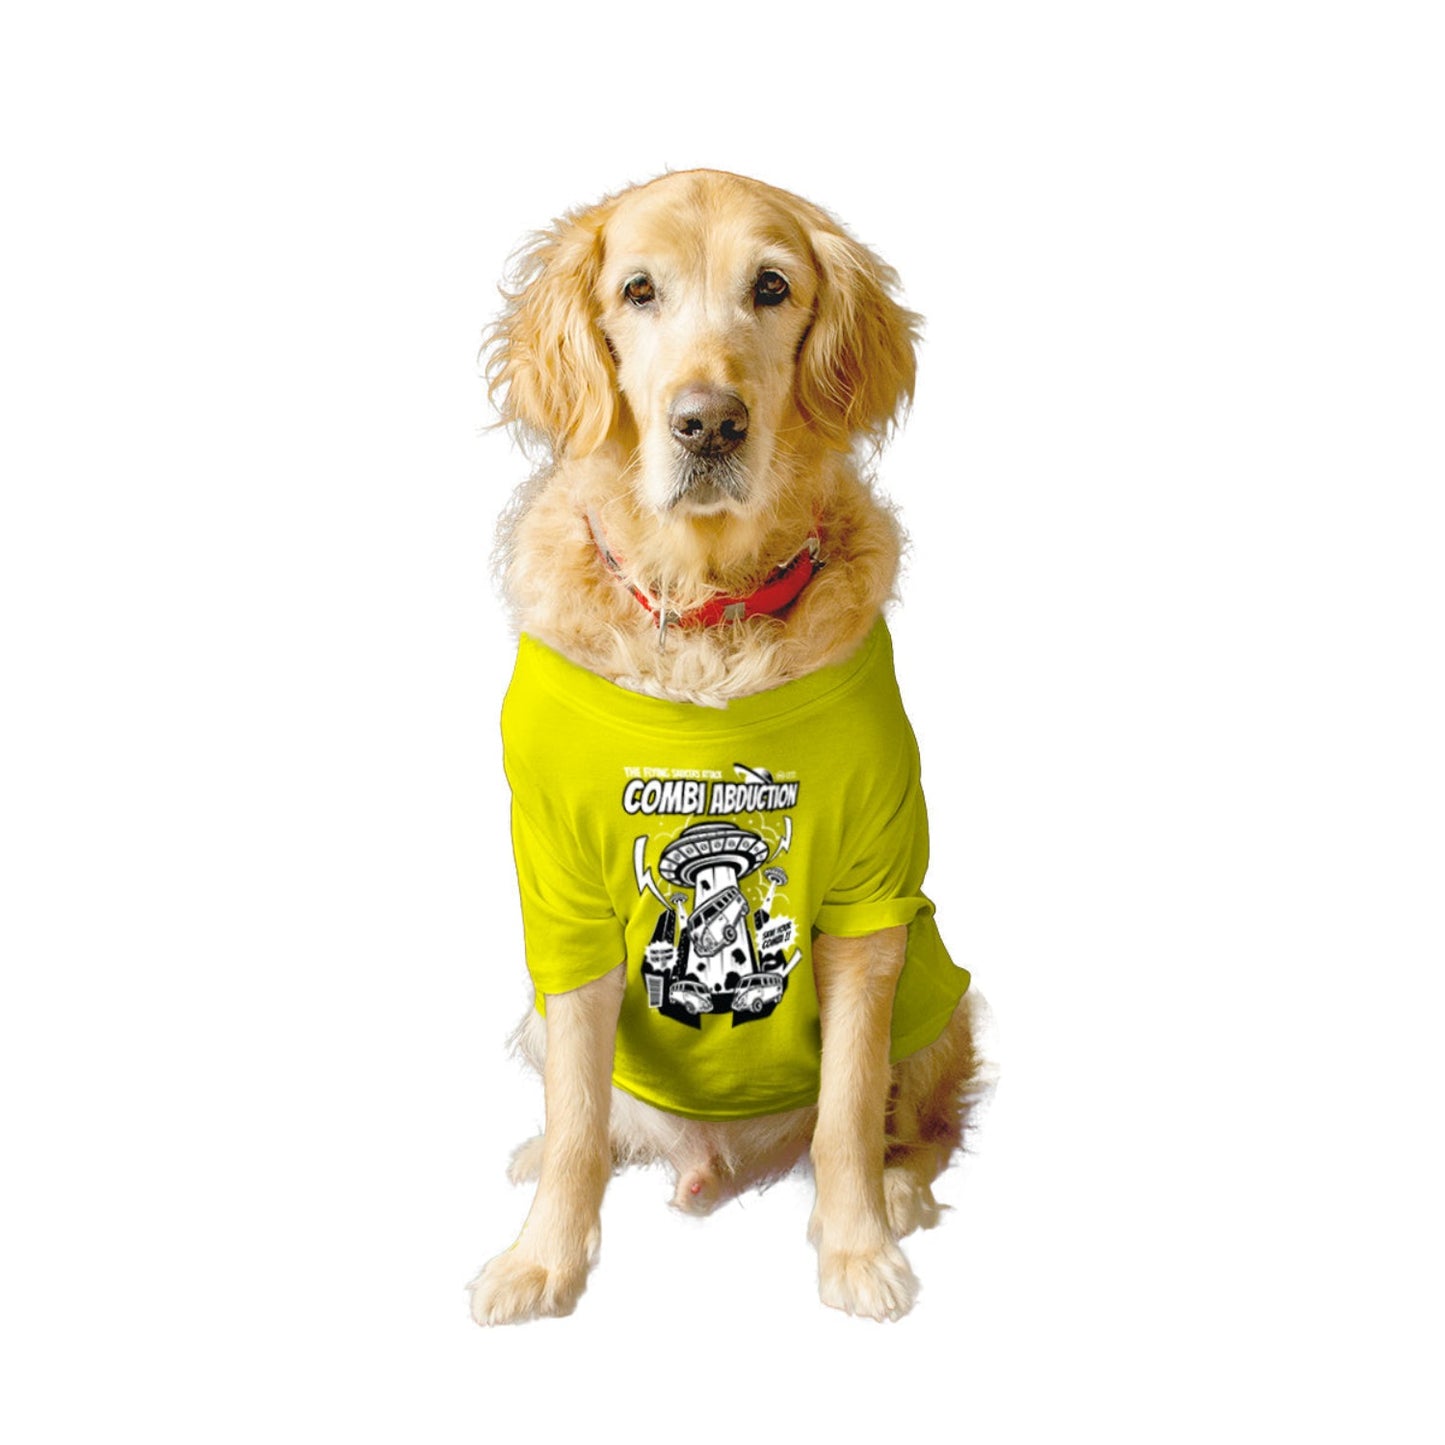 Ruse XX-Small (Chihuahuas, Papillons) / Yellow Ruse Basic Crew Neck "COMBI ABDUCTION" Printed Half Sleeves Dog Tee